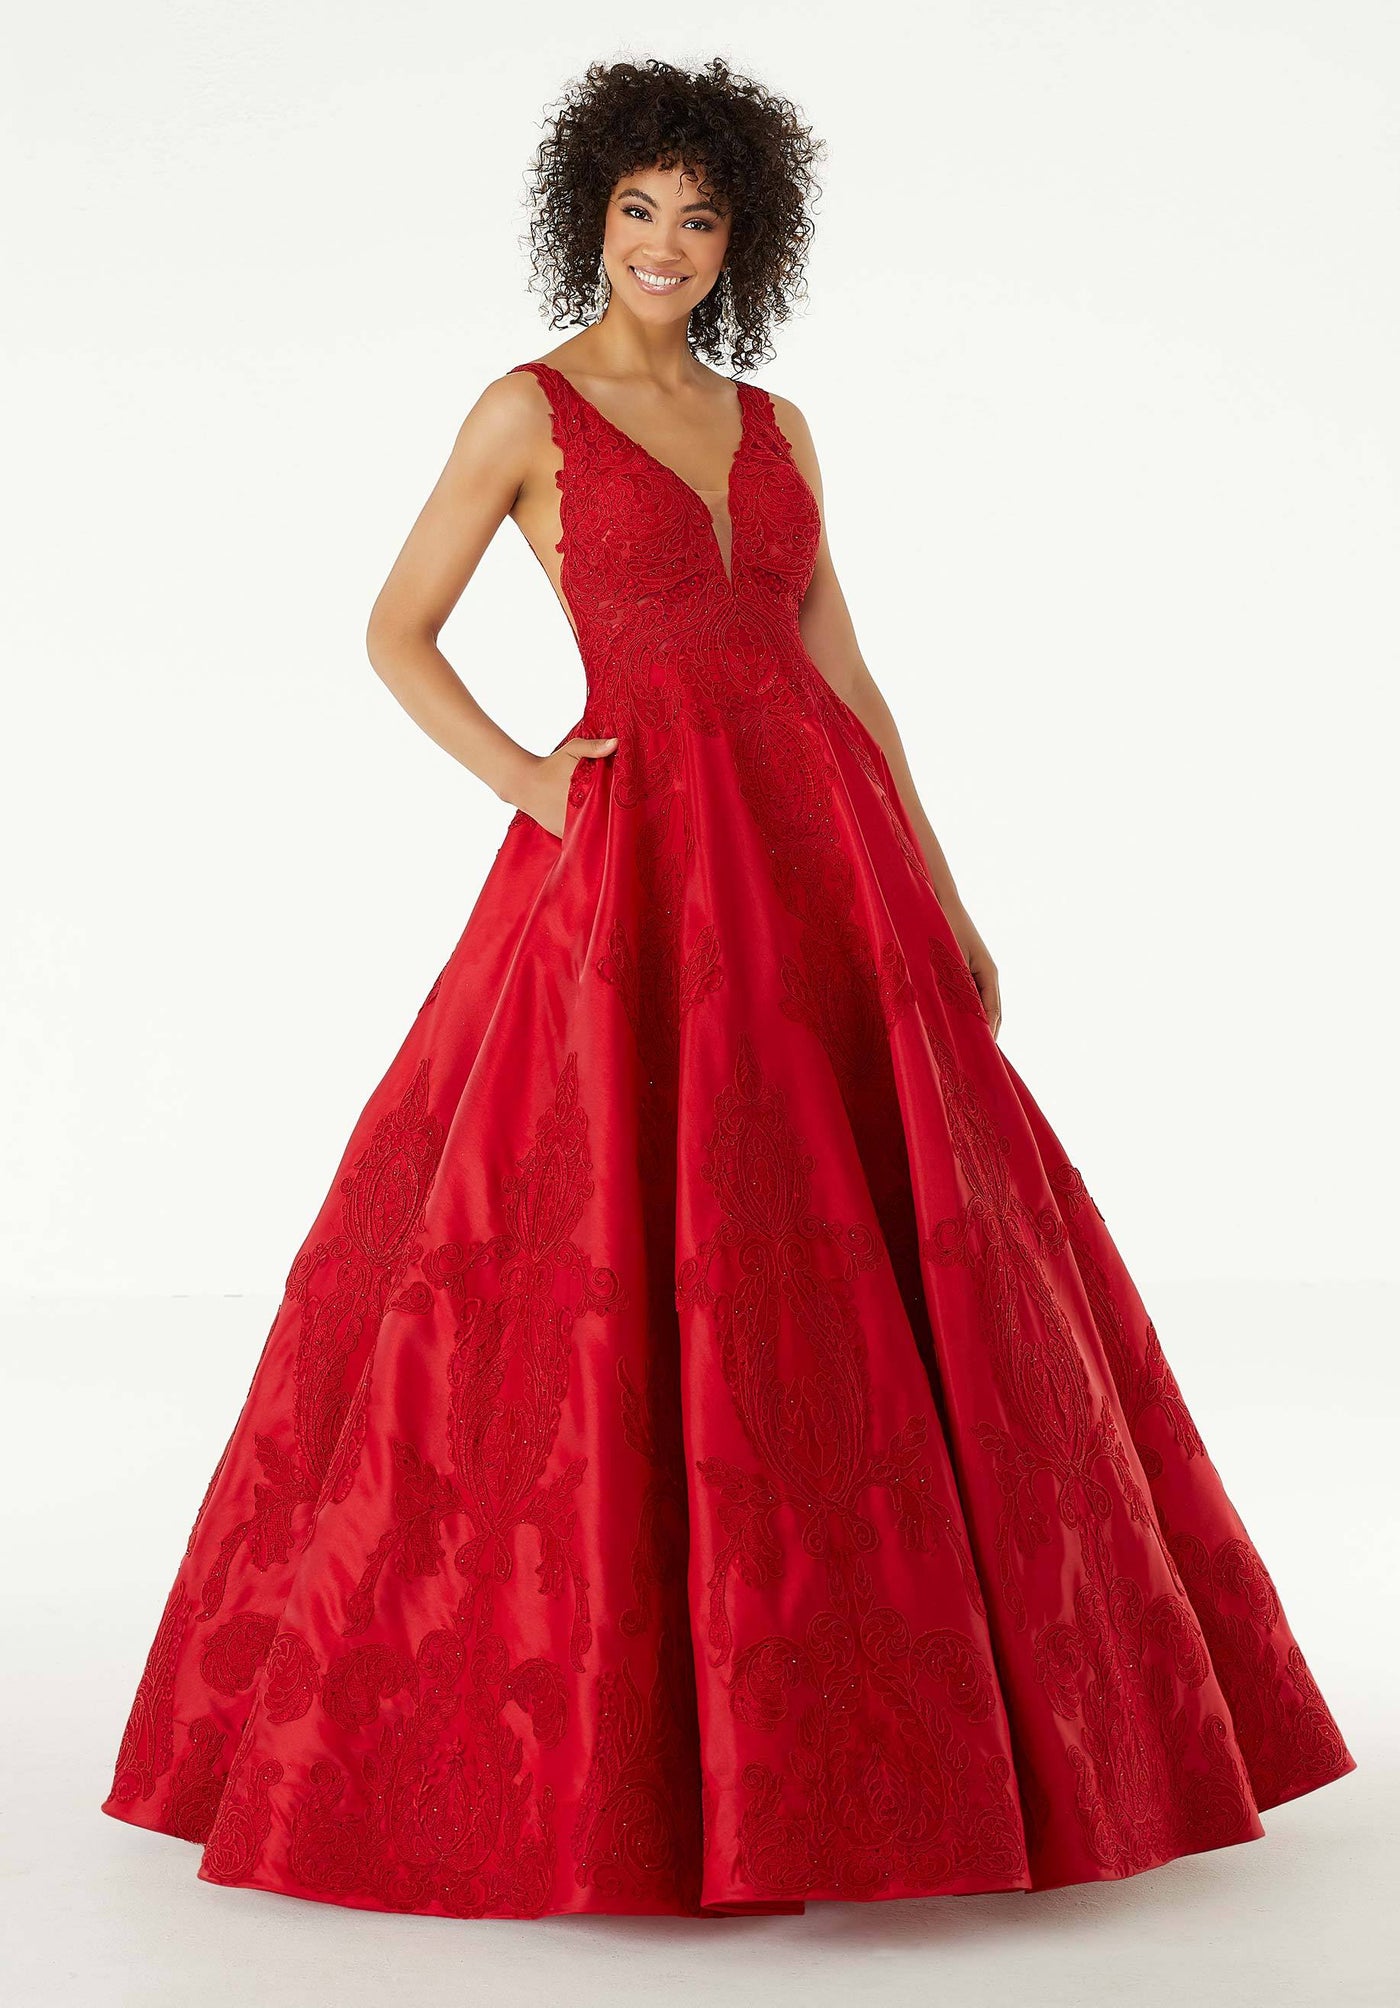 Mori Lee - 43089 Sleeveless V Neck Beaded Lace Appliques Satin Gown in Red